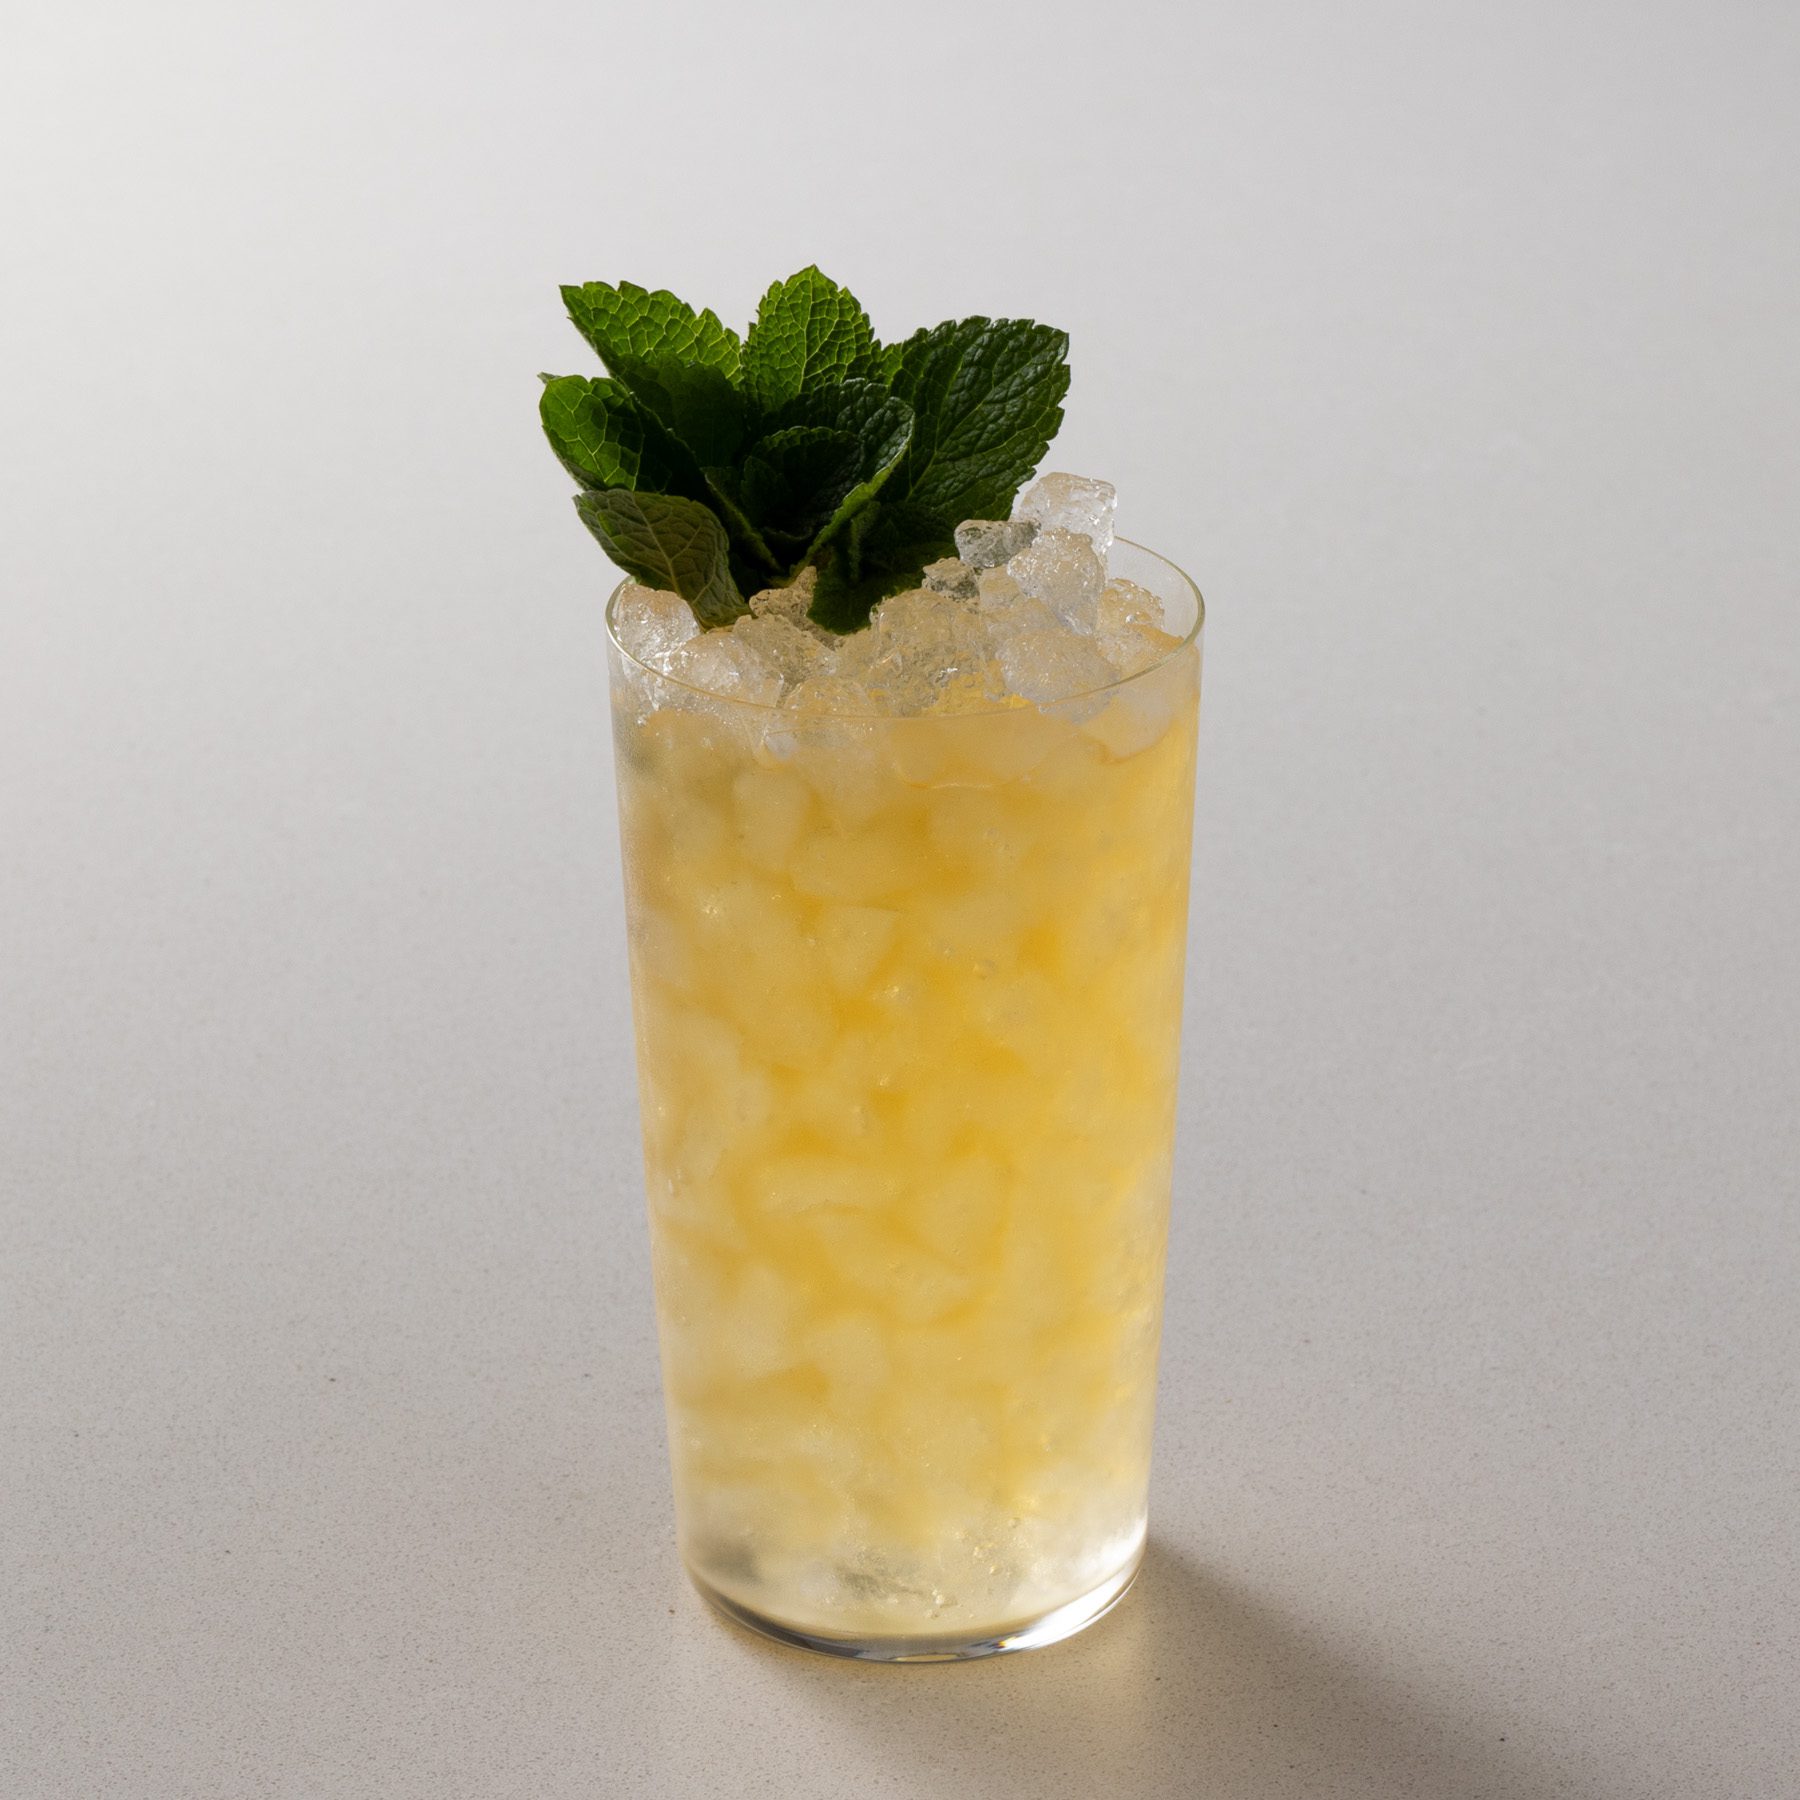 Planter's Punch cocktail